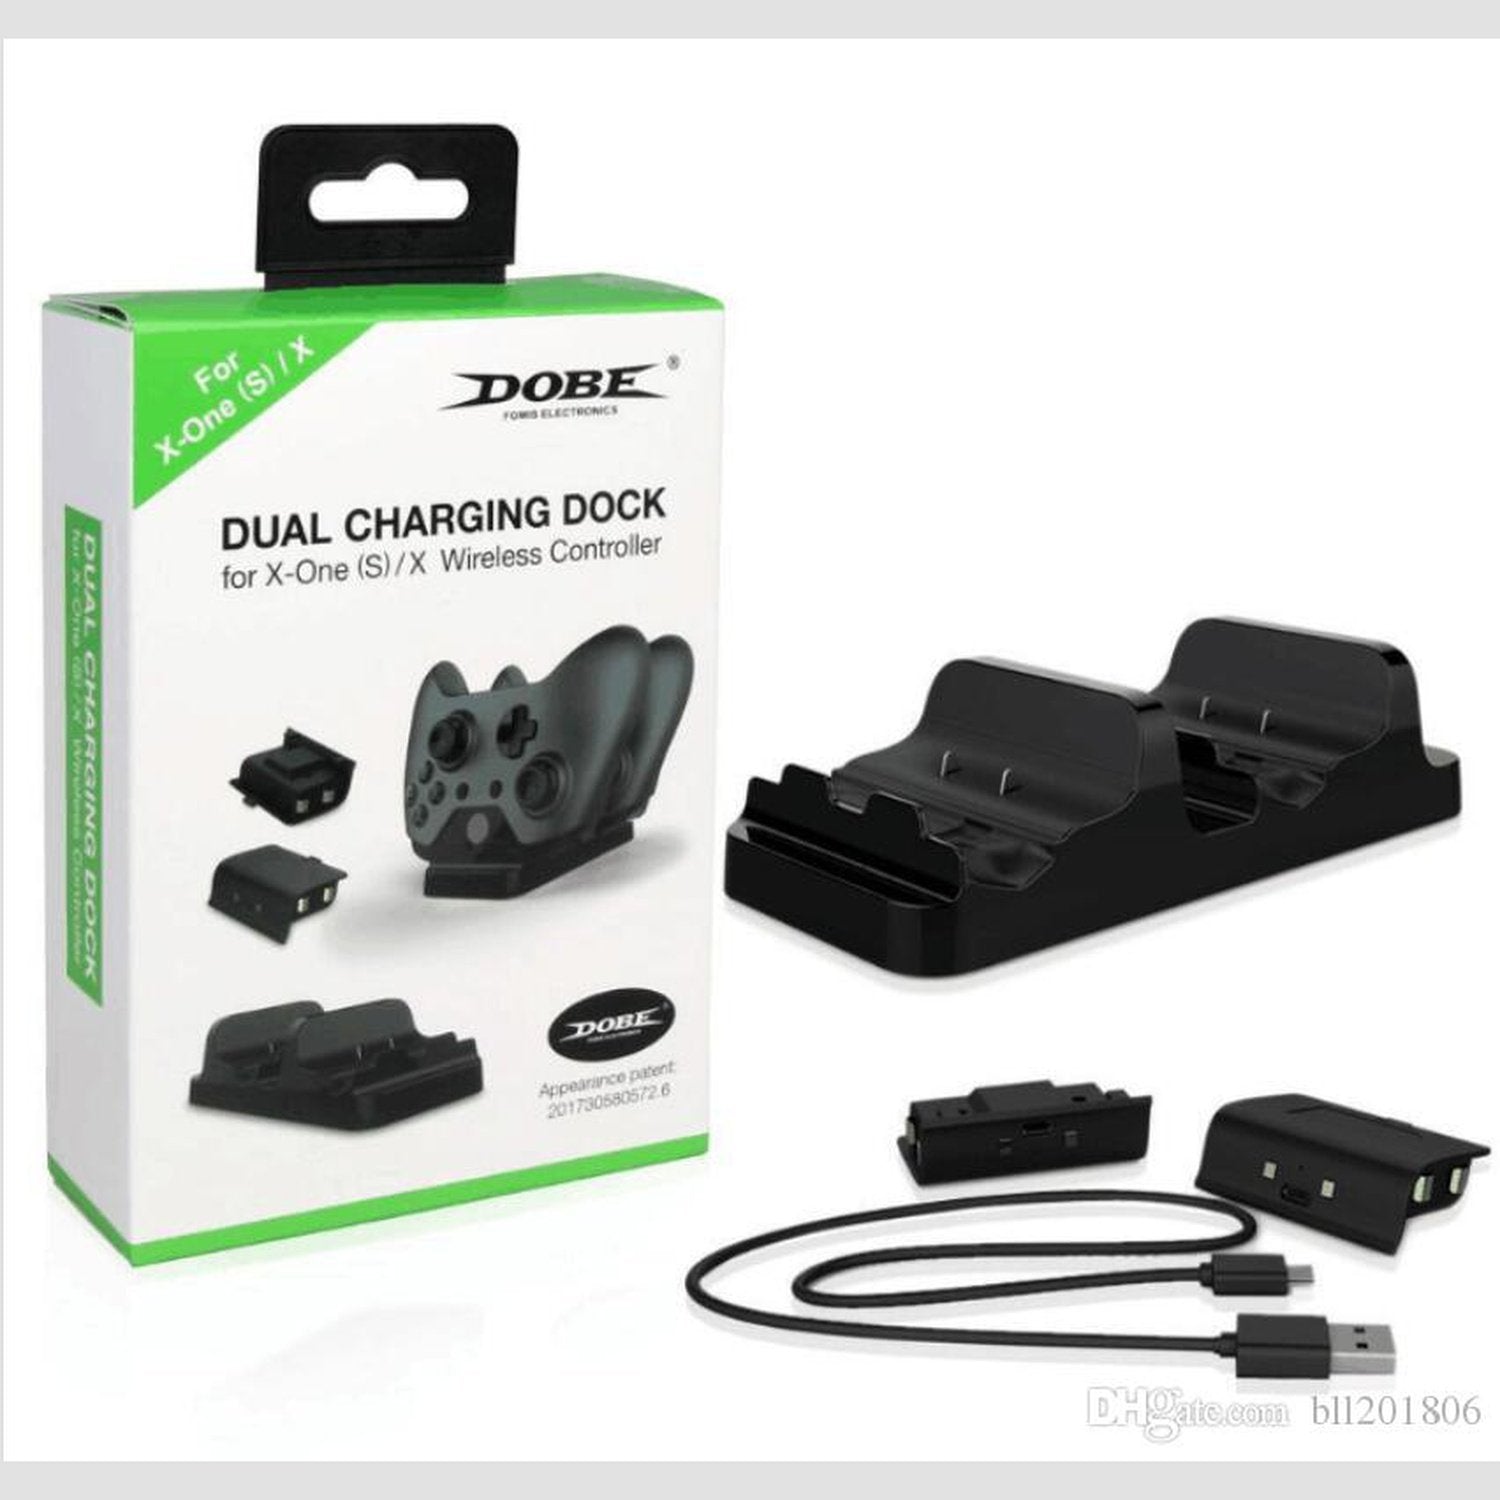 Controller Charger Dock compatible with Xbox Controllers | Charging Dock Station - includes 2 Rechargeable Battery Pack